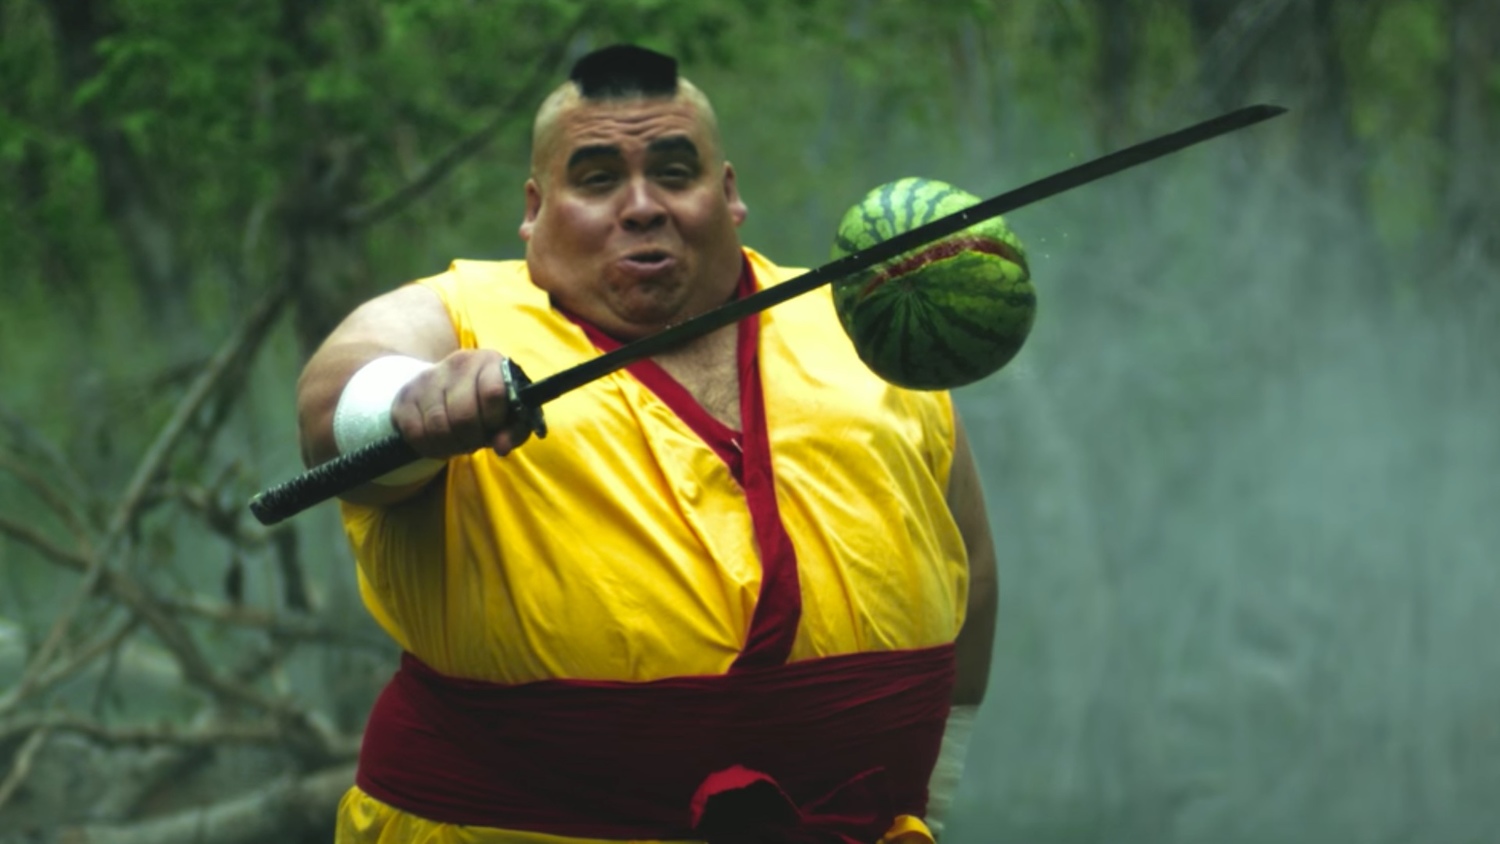 Fruit Ninja to be adapted into a live-action feature film - Polygon